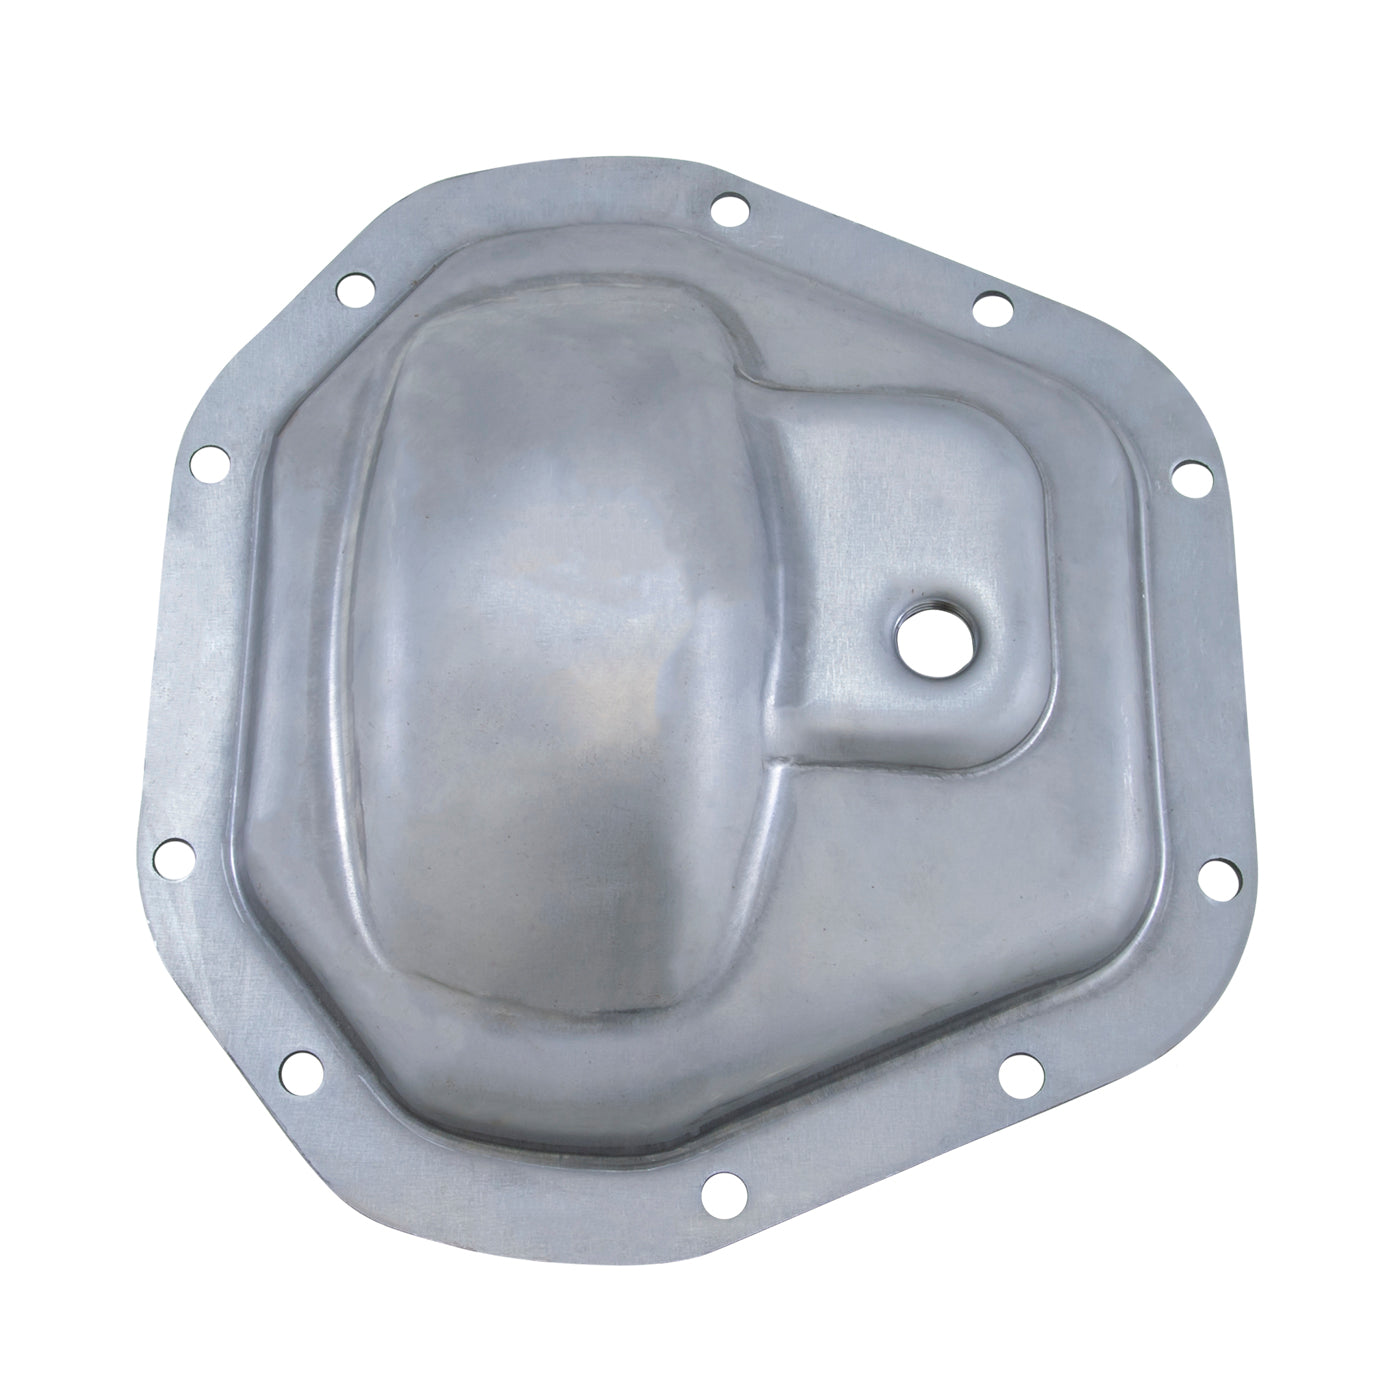 Yukon Gear Ford (4WD) Differential Cover - Front YPC5-D50